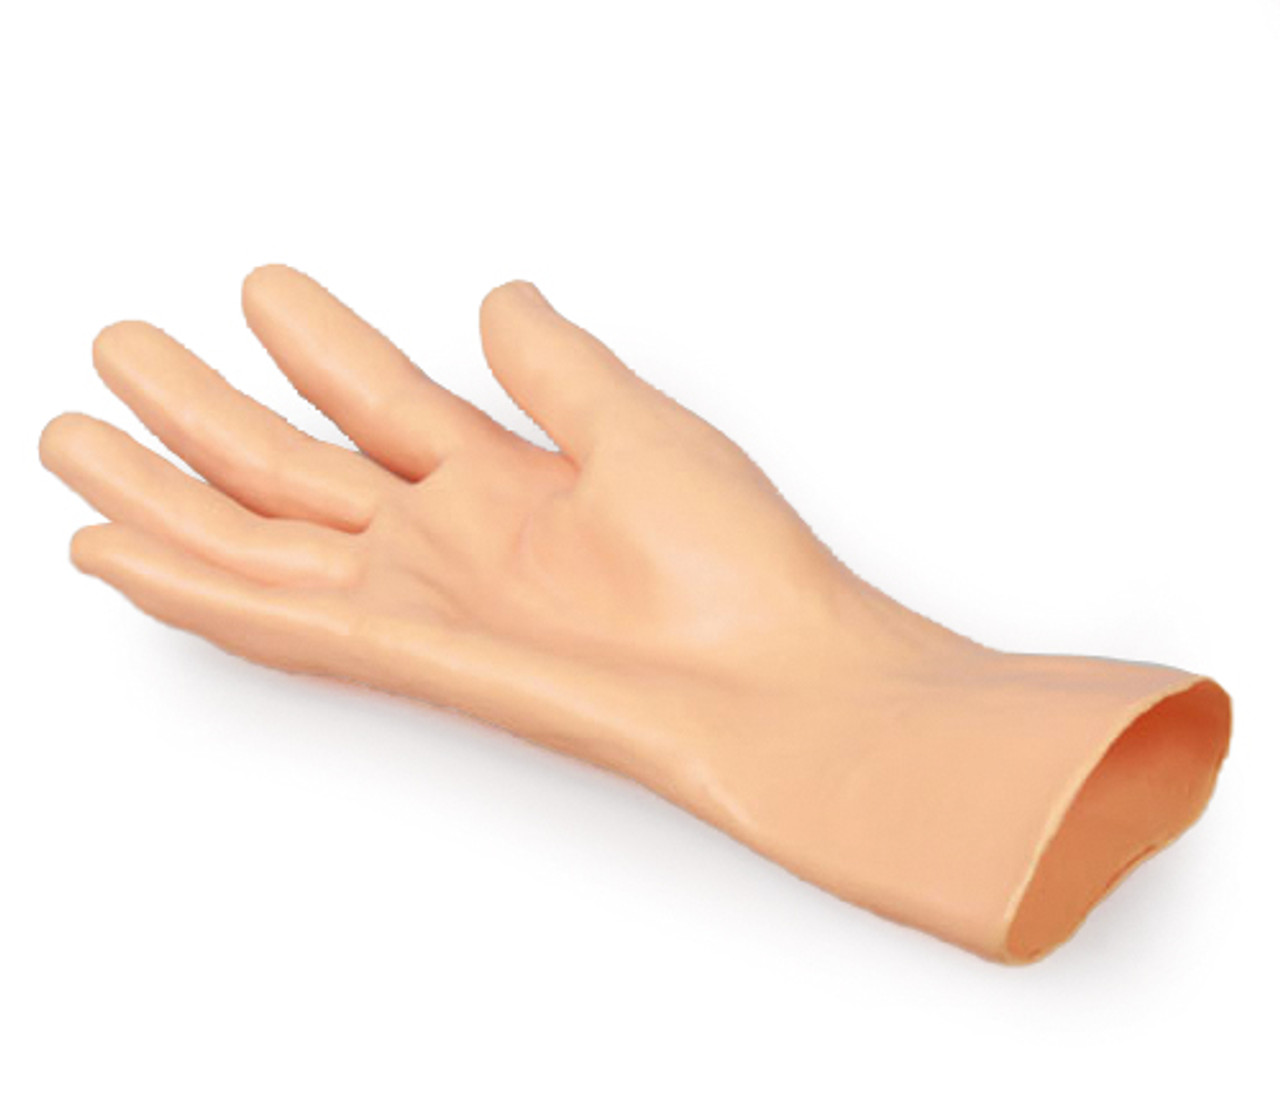 Intravenous Injection and Infusion Training Arm Replacement Hand Skin